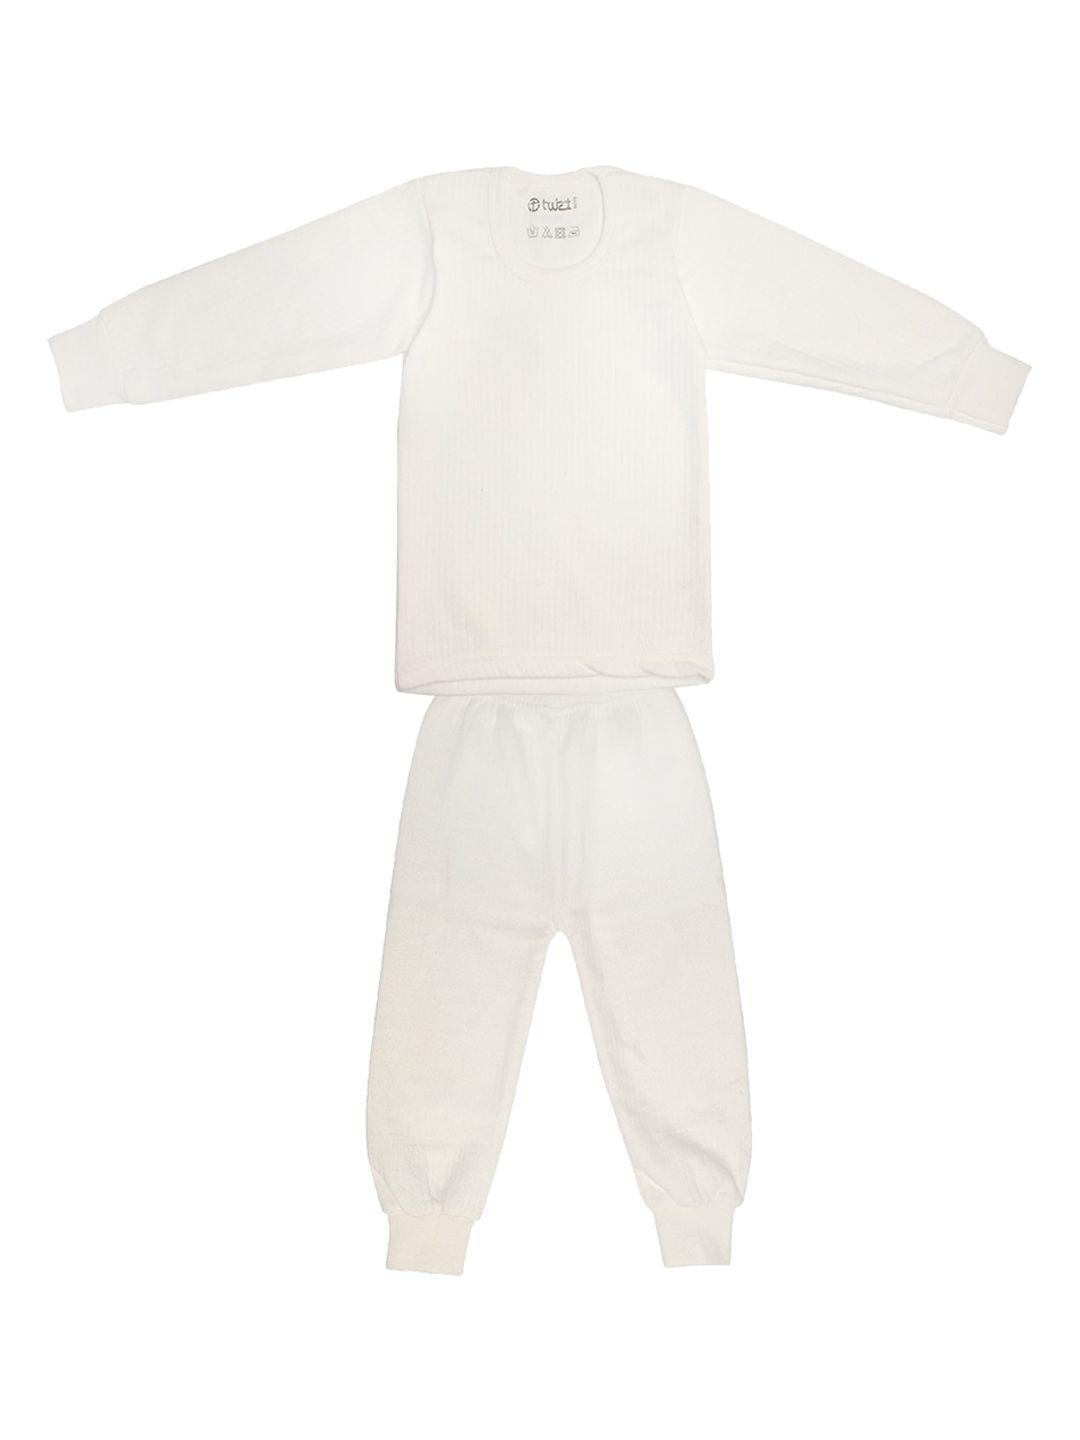 tiny-hug-boys-off-white-solid-cotton-anti-bacterial-thermal-set